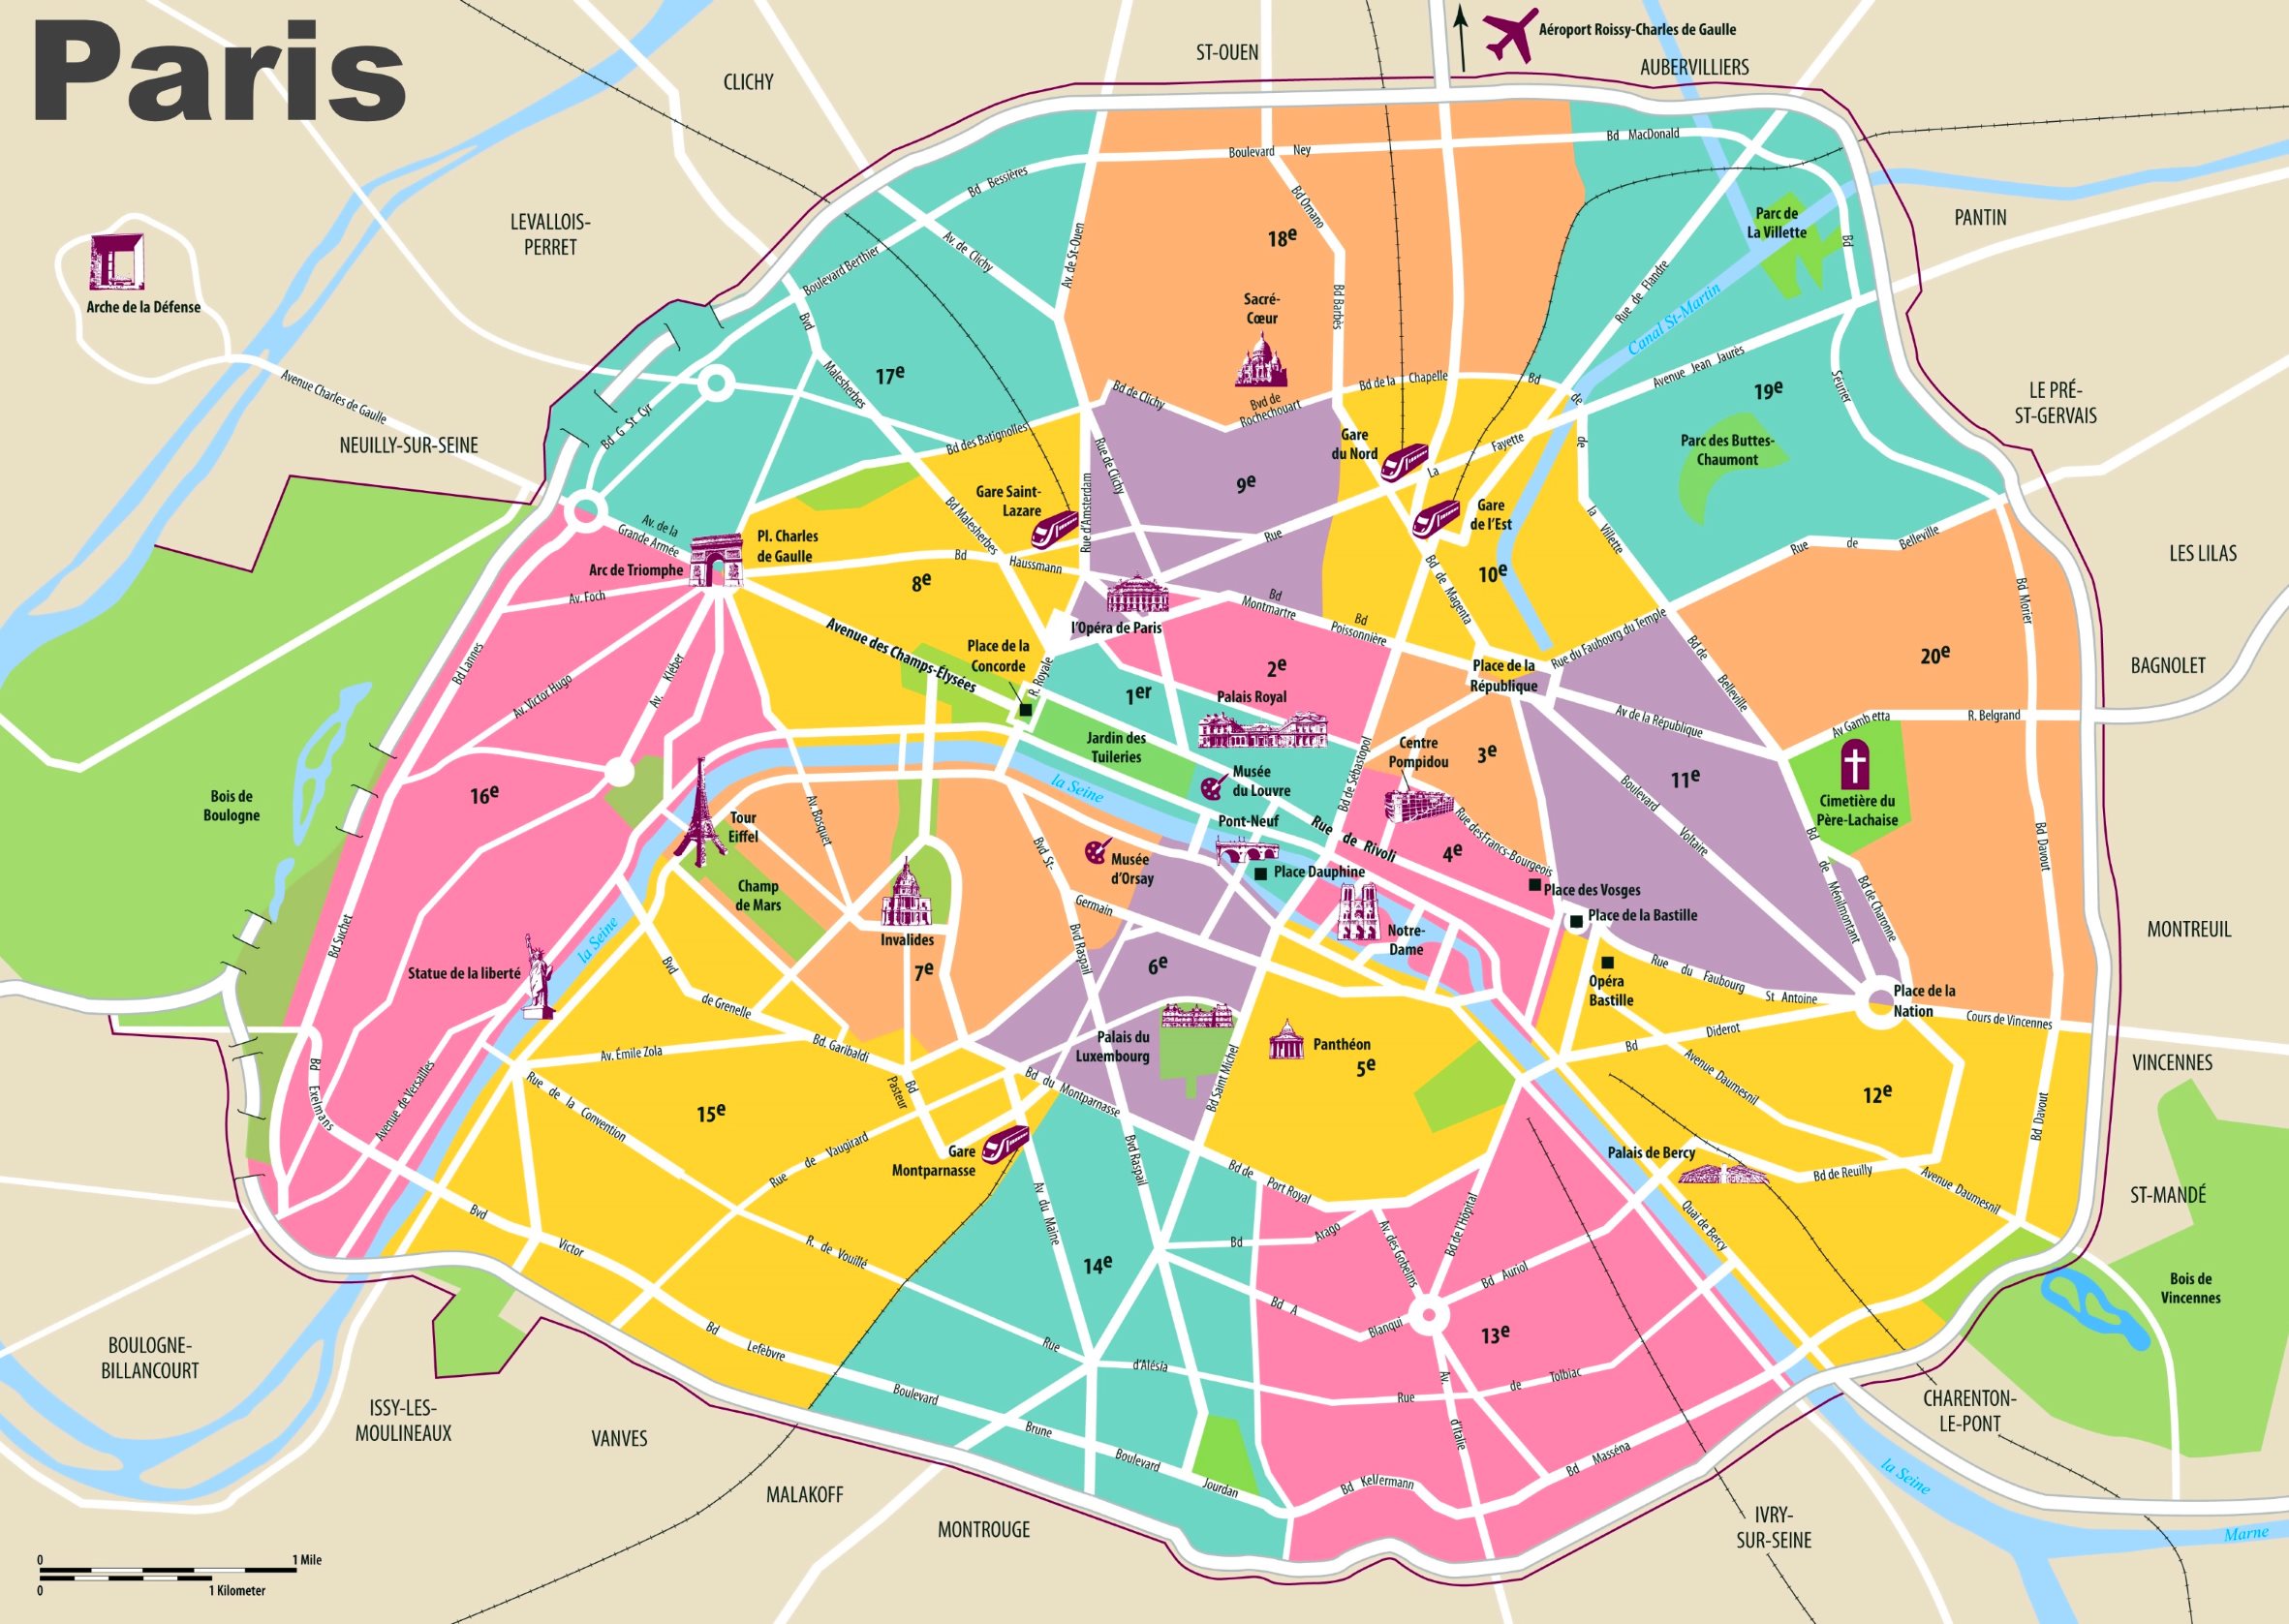 Paris travel map with tourist attractions and arrondissements